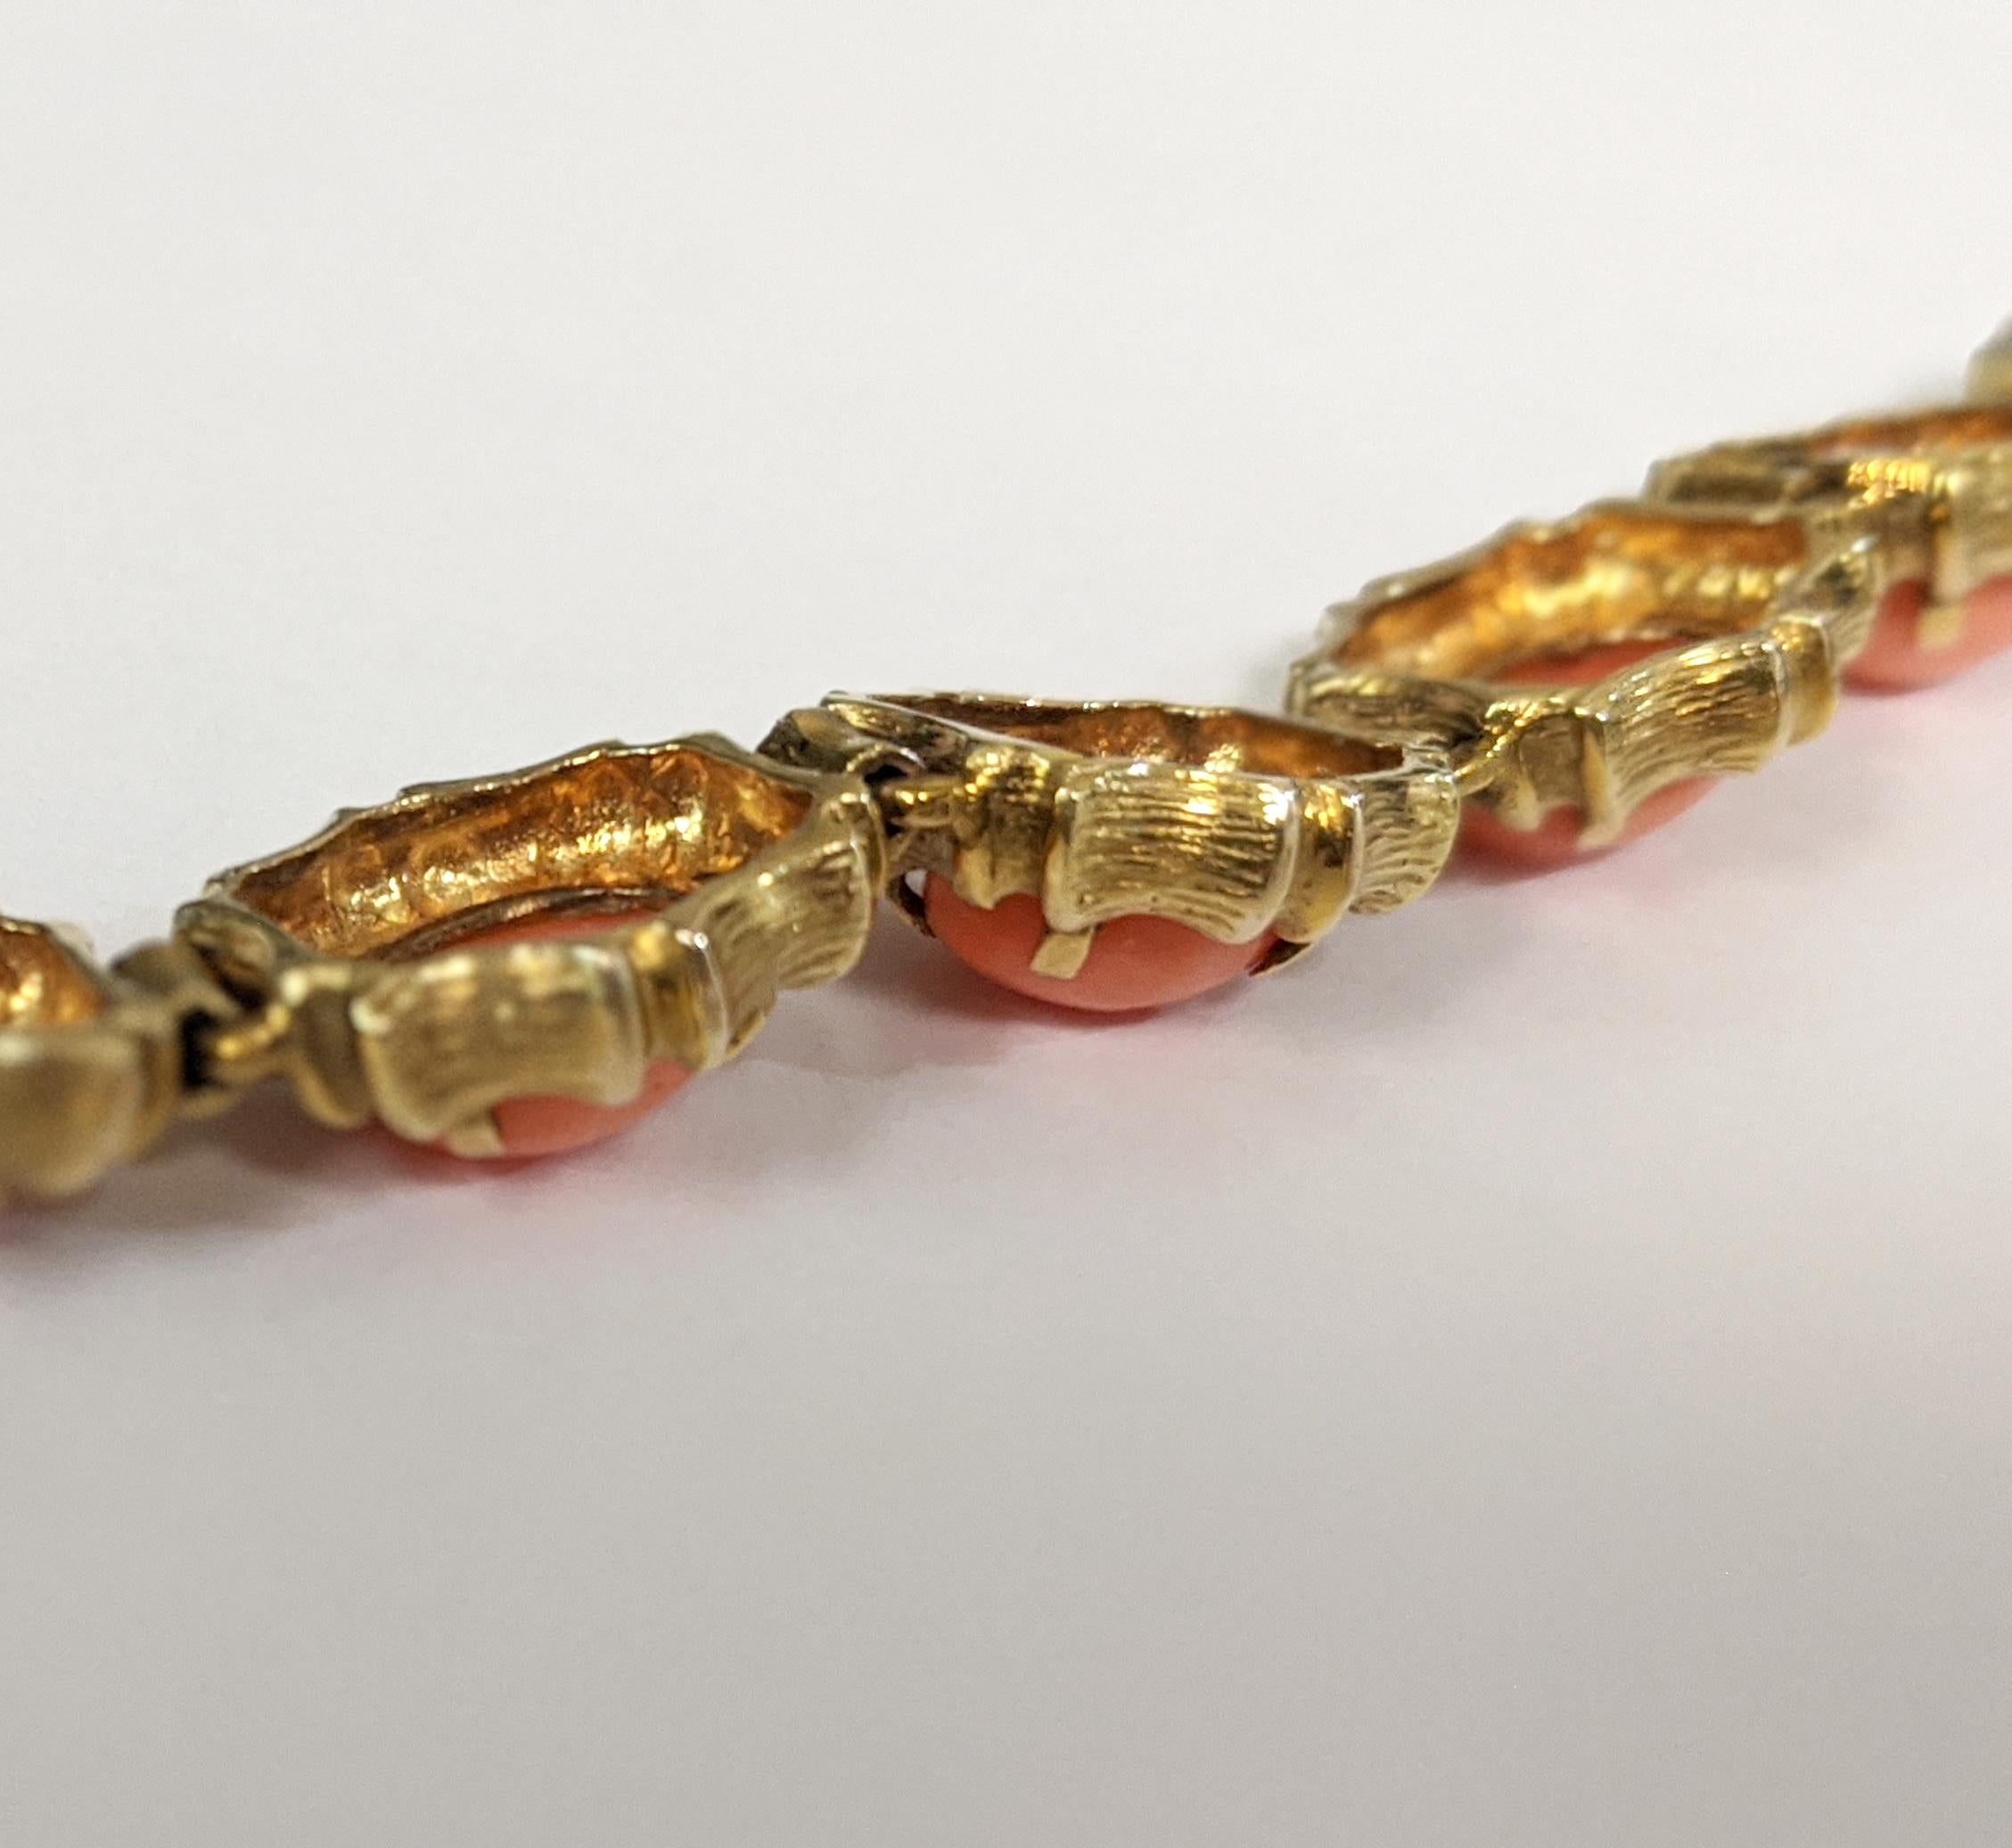 Salmon-colored corals glow in this 14 K yellow gold bracelet. The stone settings are finely detailed with a wood-carved texture. 

The bracelet contains ten oval cabochon corals. Approximately 7.5 inches in length, with an easy-close box clasp and